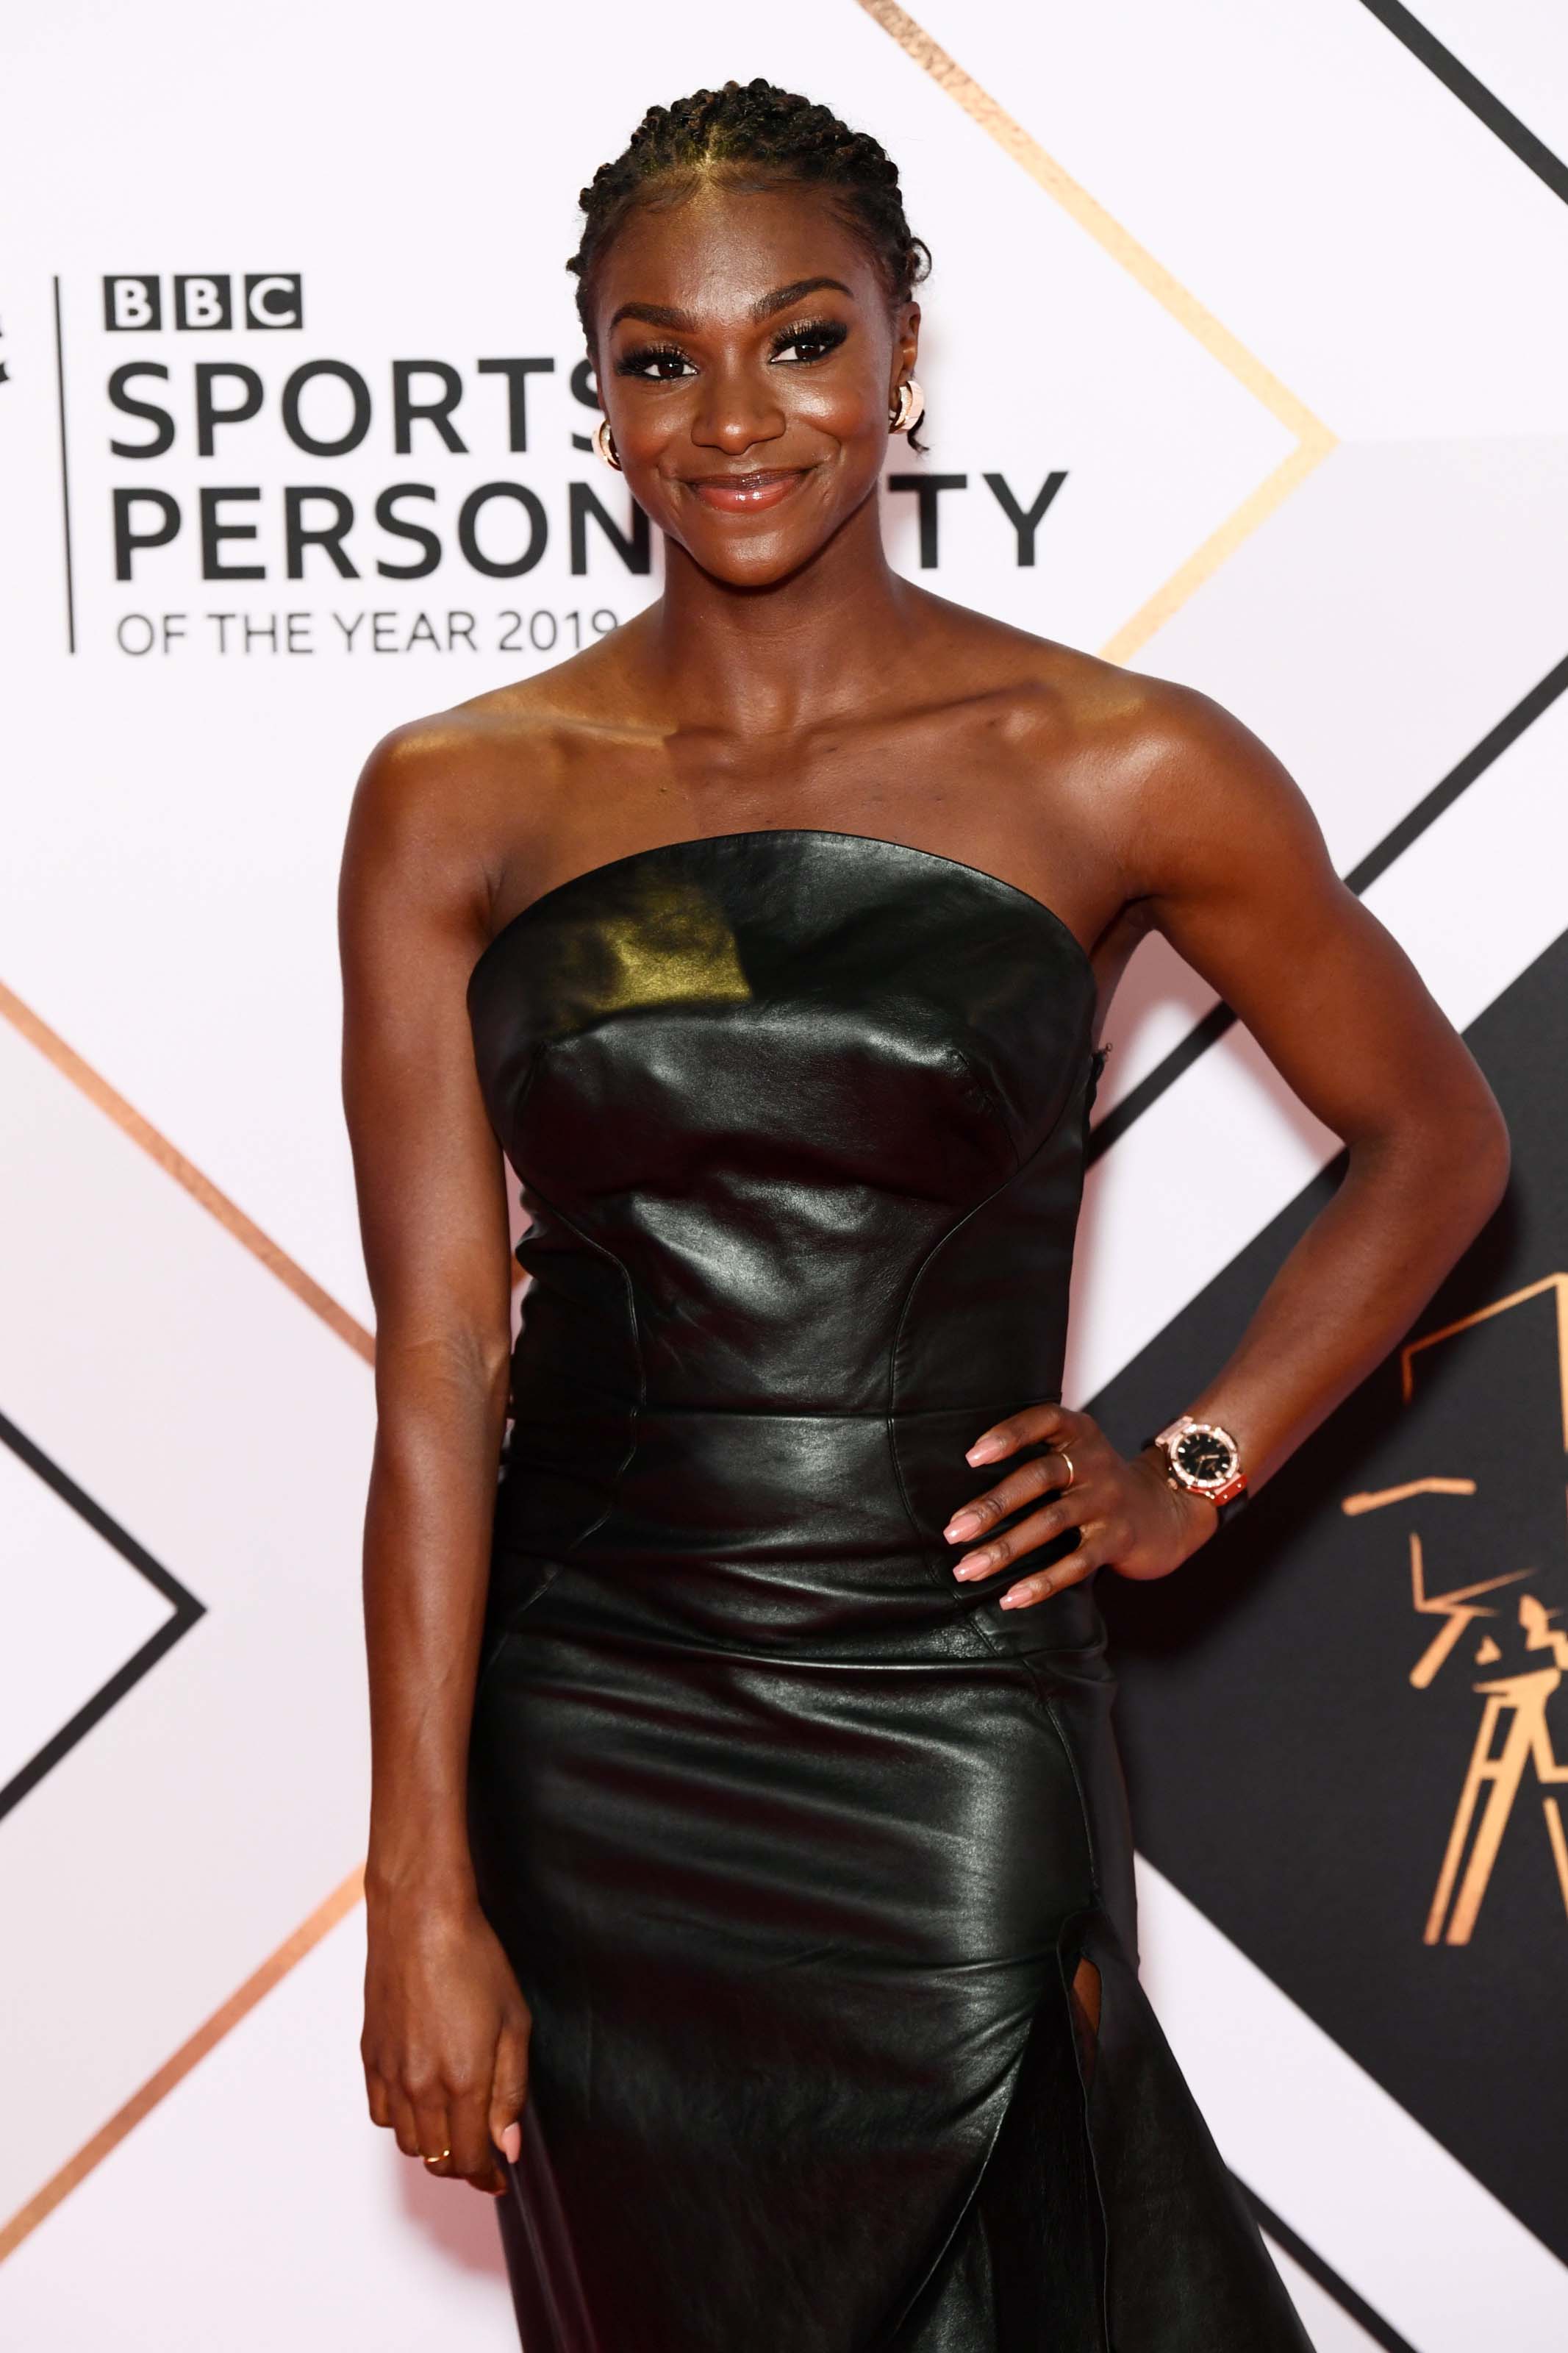 Dina Asher Smith attends BBC Sports Personality of the Year